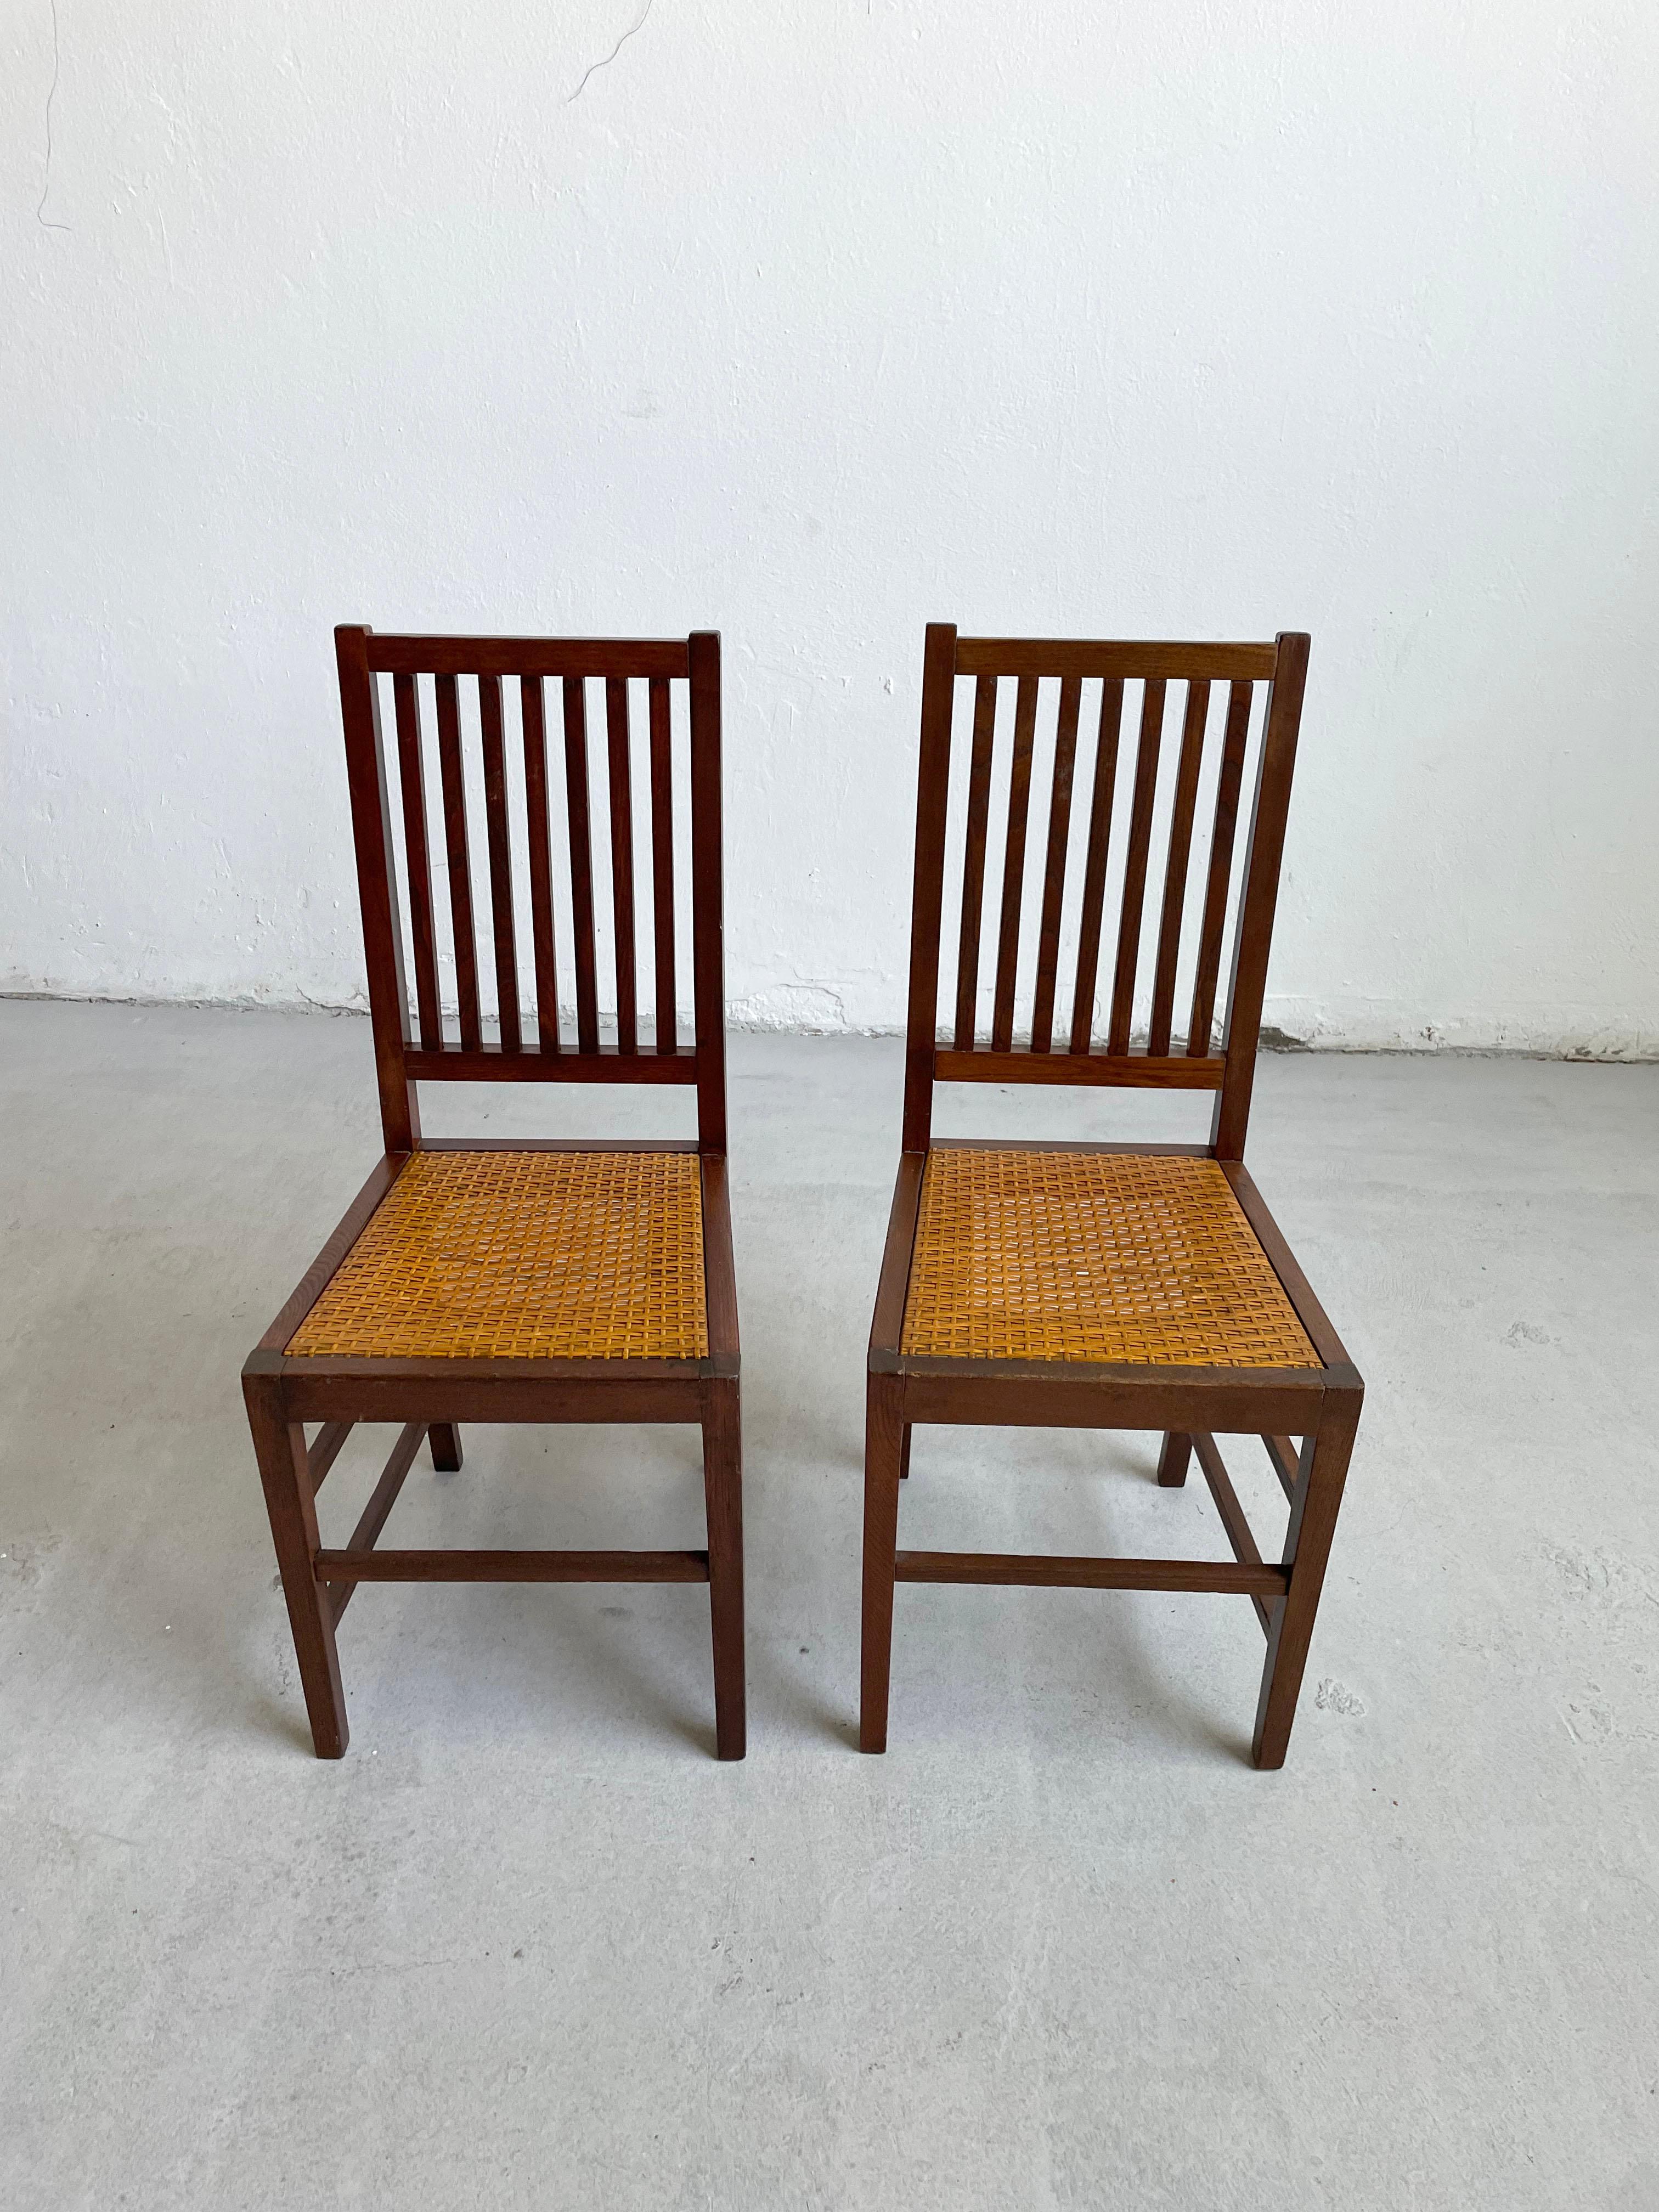 Set of 2 original highback dining chairs designed by Hans Vollmer and manufactured by Prag-Rudniker Korbfabrikation in 1902, Vienna

Lit. 1902 DAS INTERIEUR III Hauptteil Seite 181

A beautiful example of geometrical Vienna Secession,